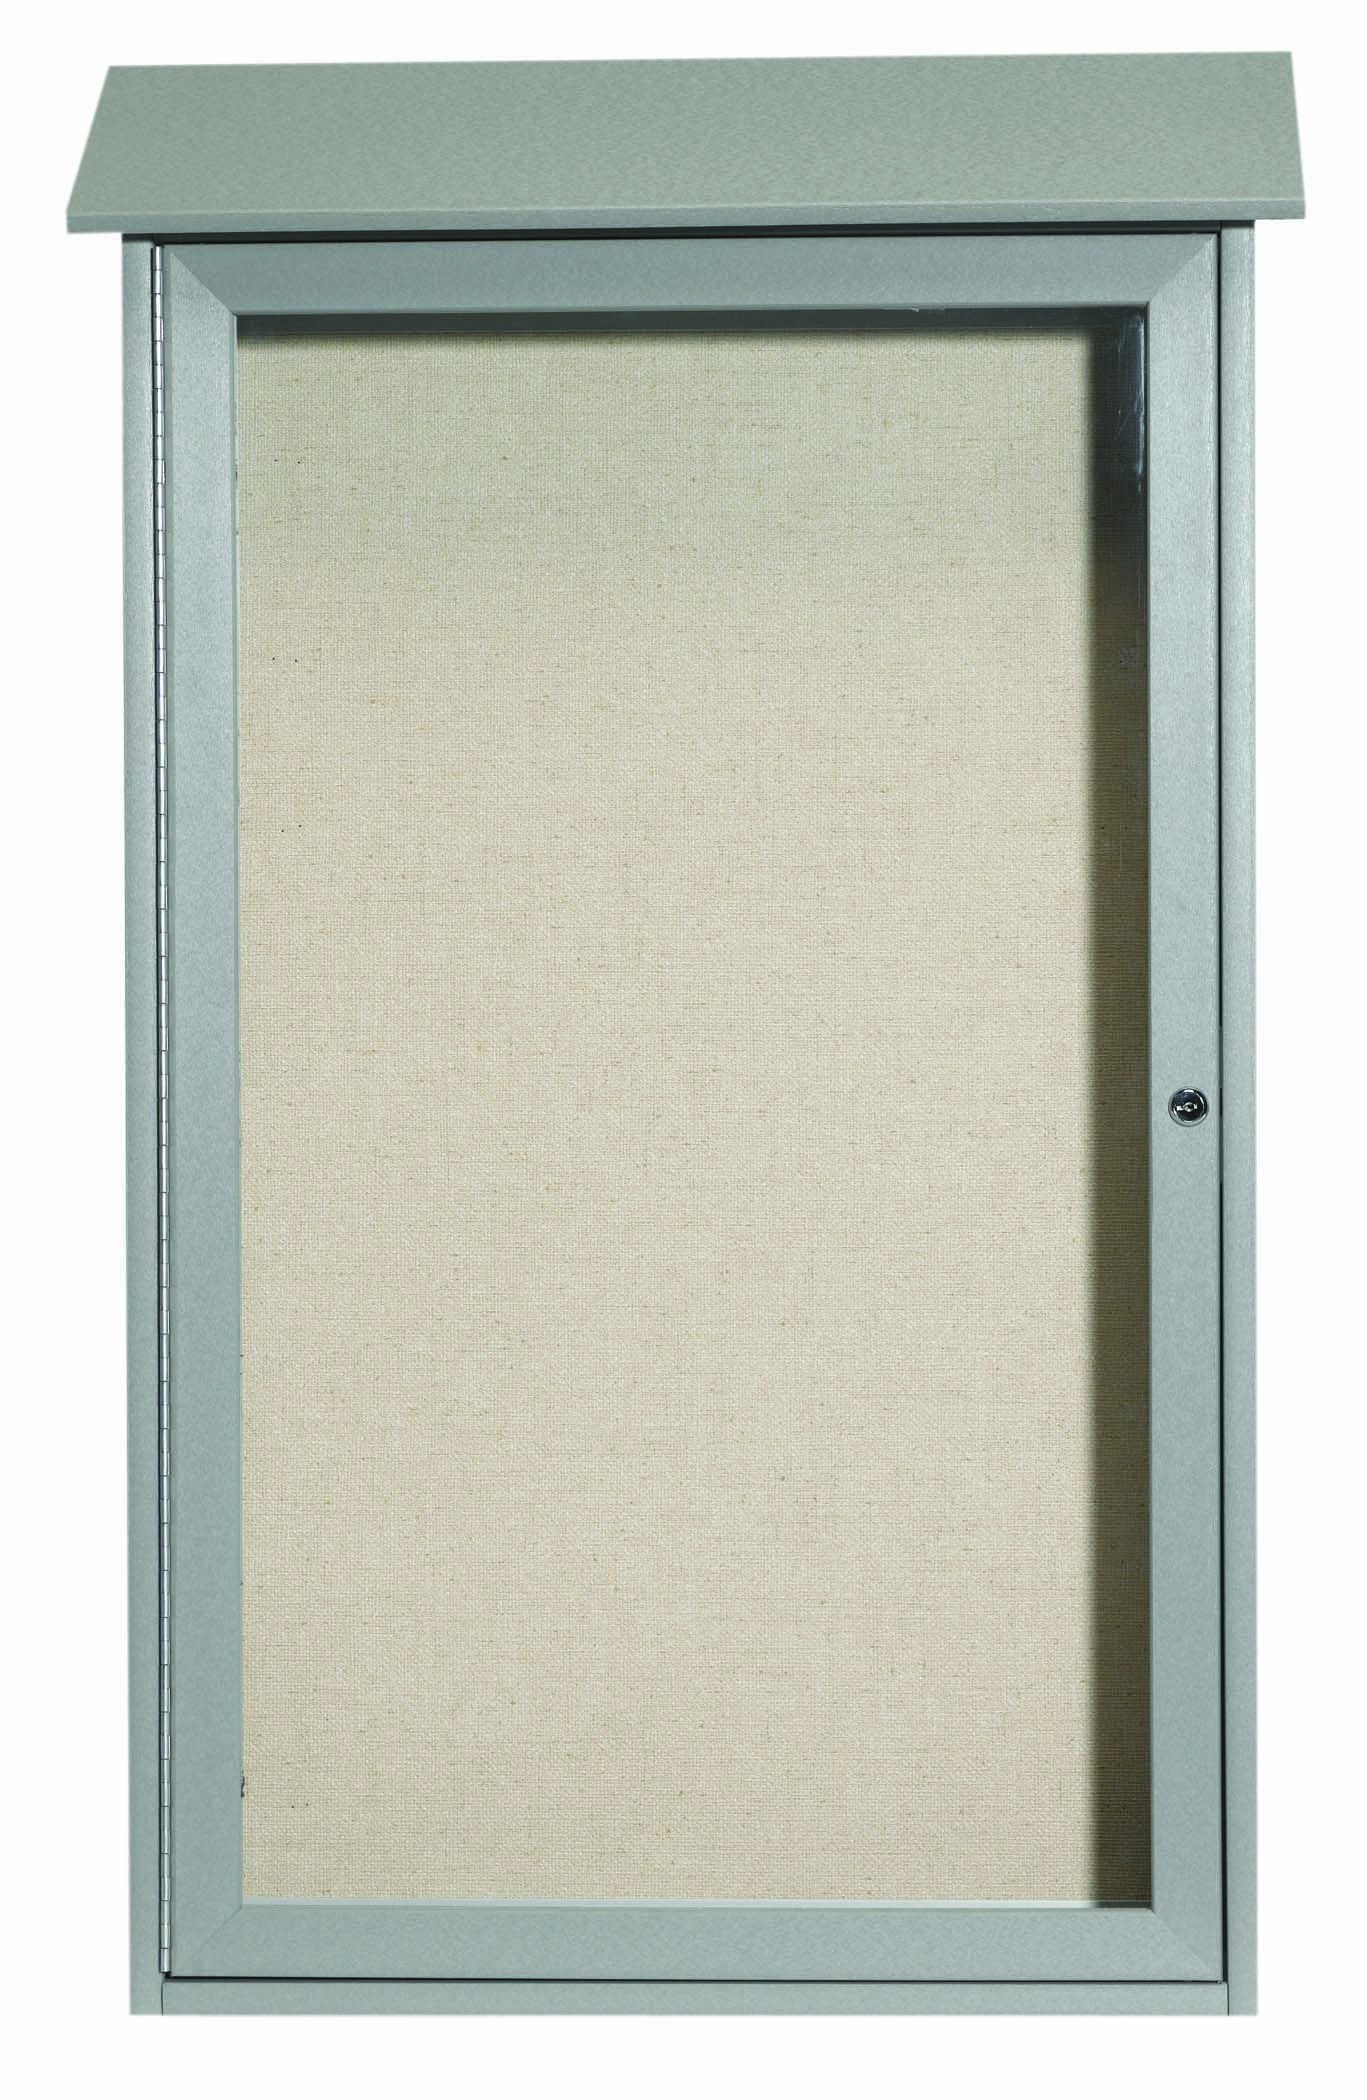 Aarco Products PLD4226-2 Light Gray Single Hinged Door Plastic Lumber Message Center with Vinyl Board, 26"W x 42"H